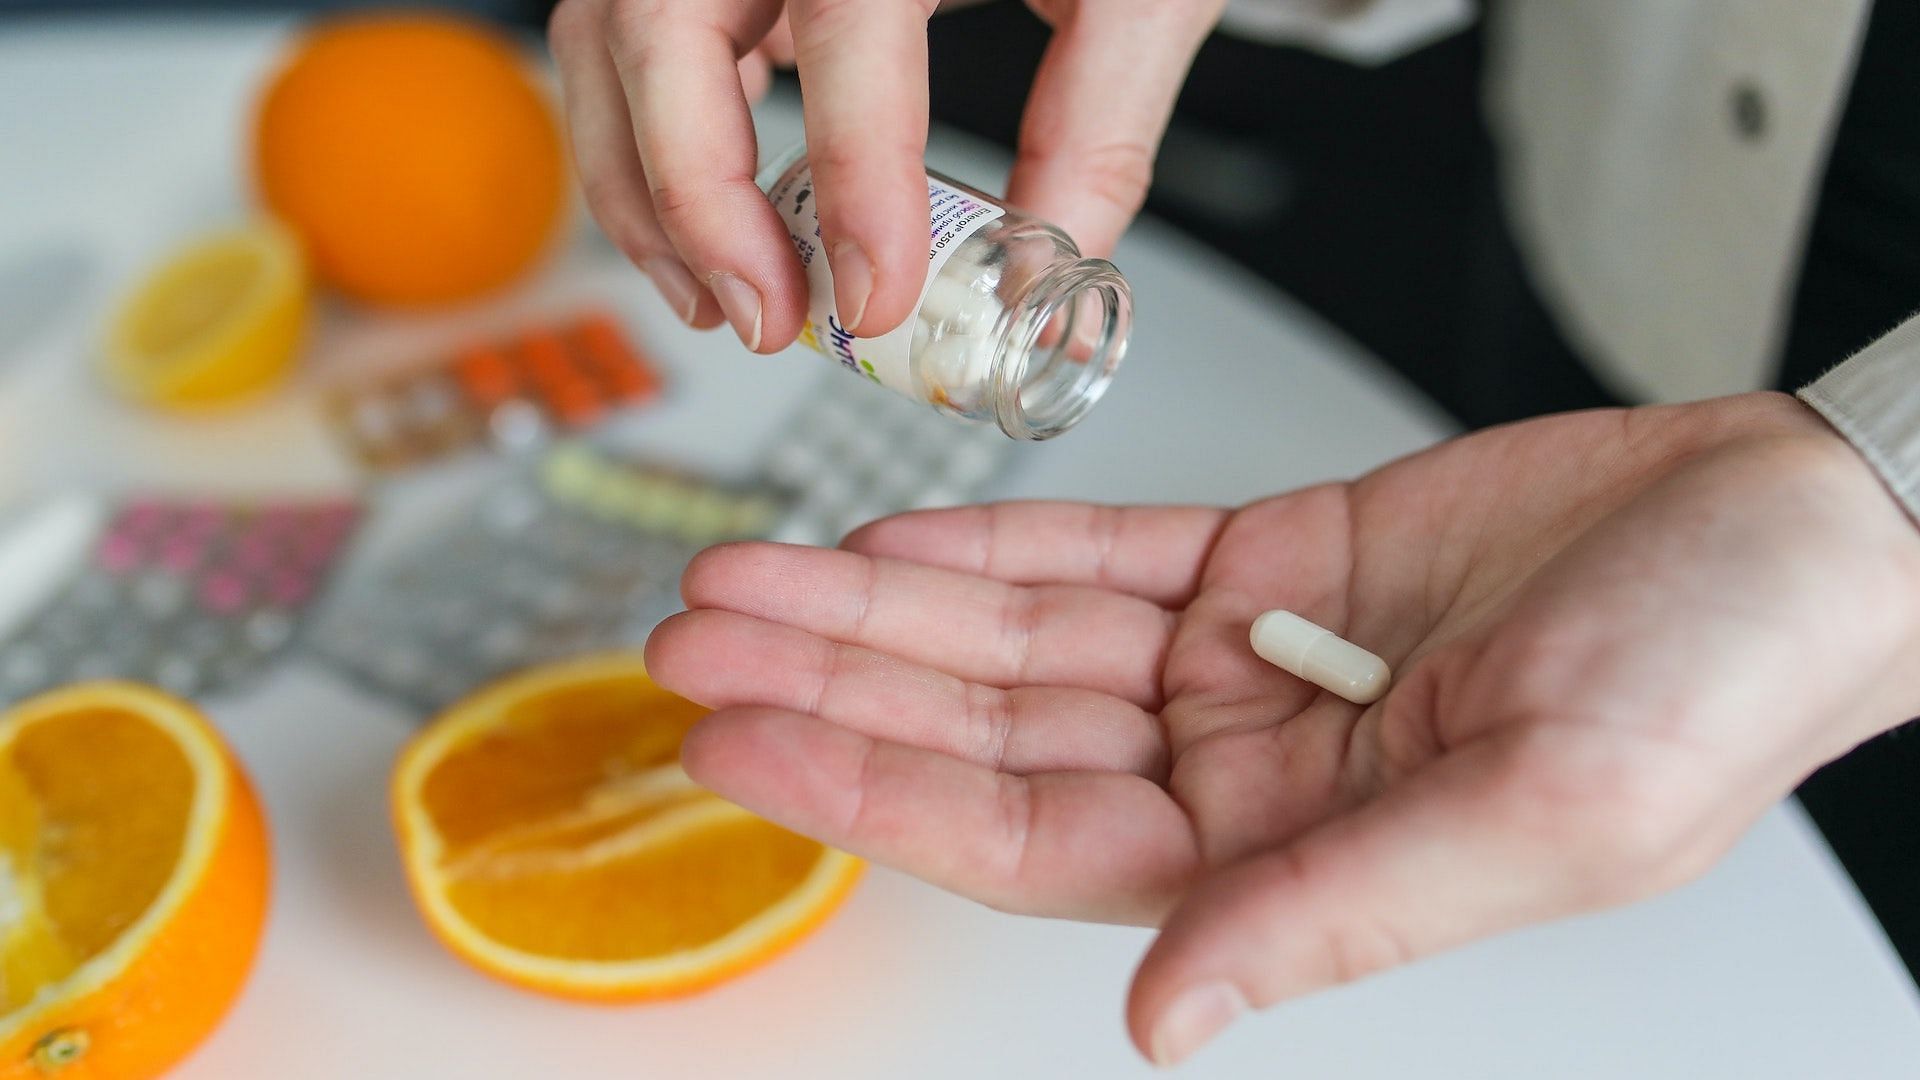 Vitamins can be taken as supplements (Image via Pexels/Polina Tankilevitch)